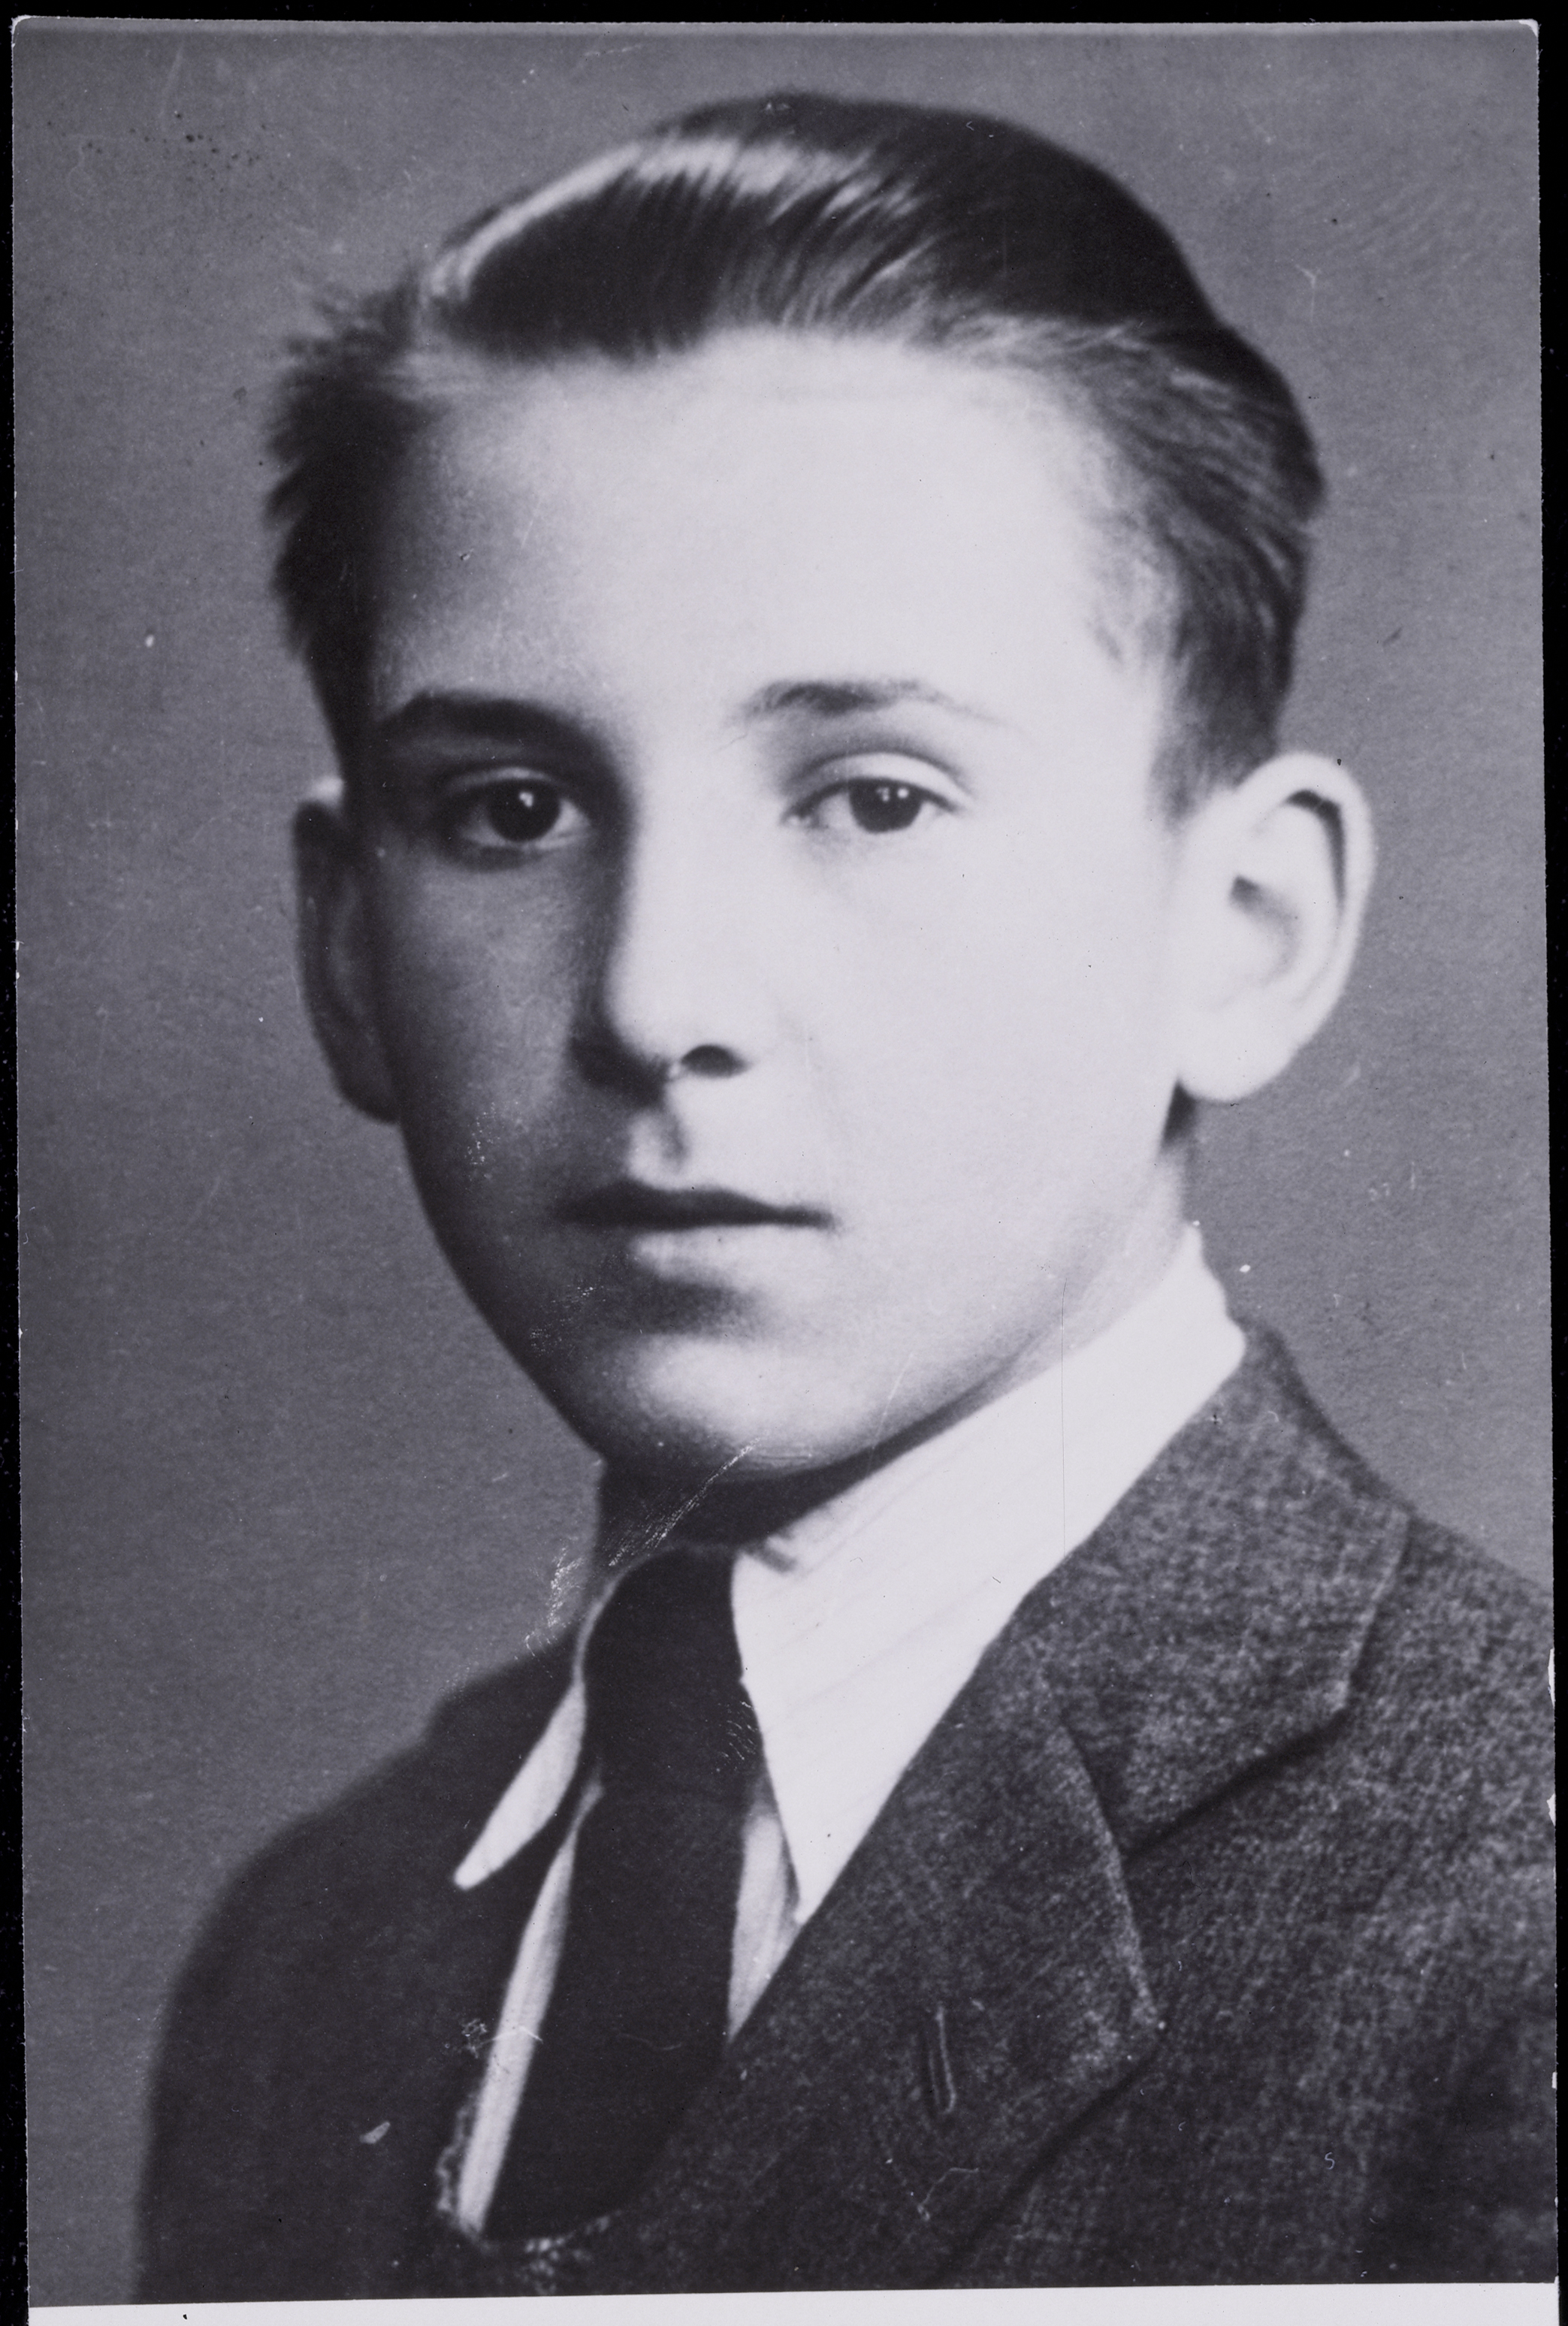 Holocaust victim and diarist. The only known existing photo of Otto Wolf. Photo courtesy of the United States Holocaust Memorial Museum, Gift of Felicitas Wolf Garda.